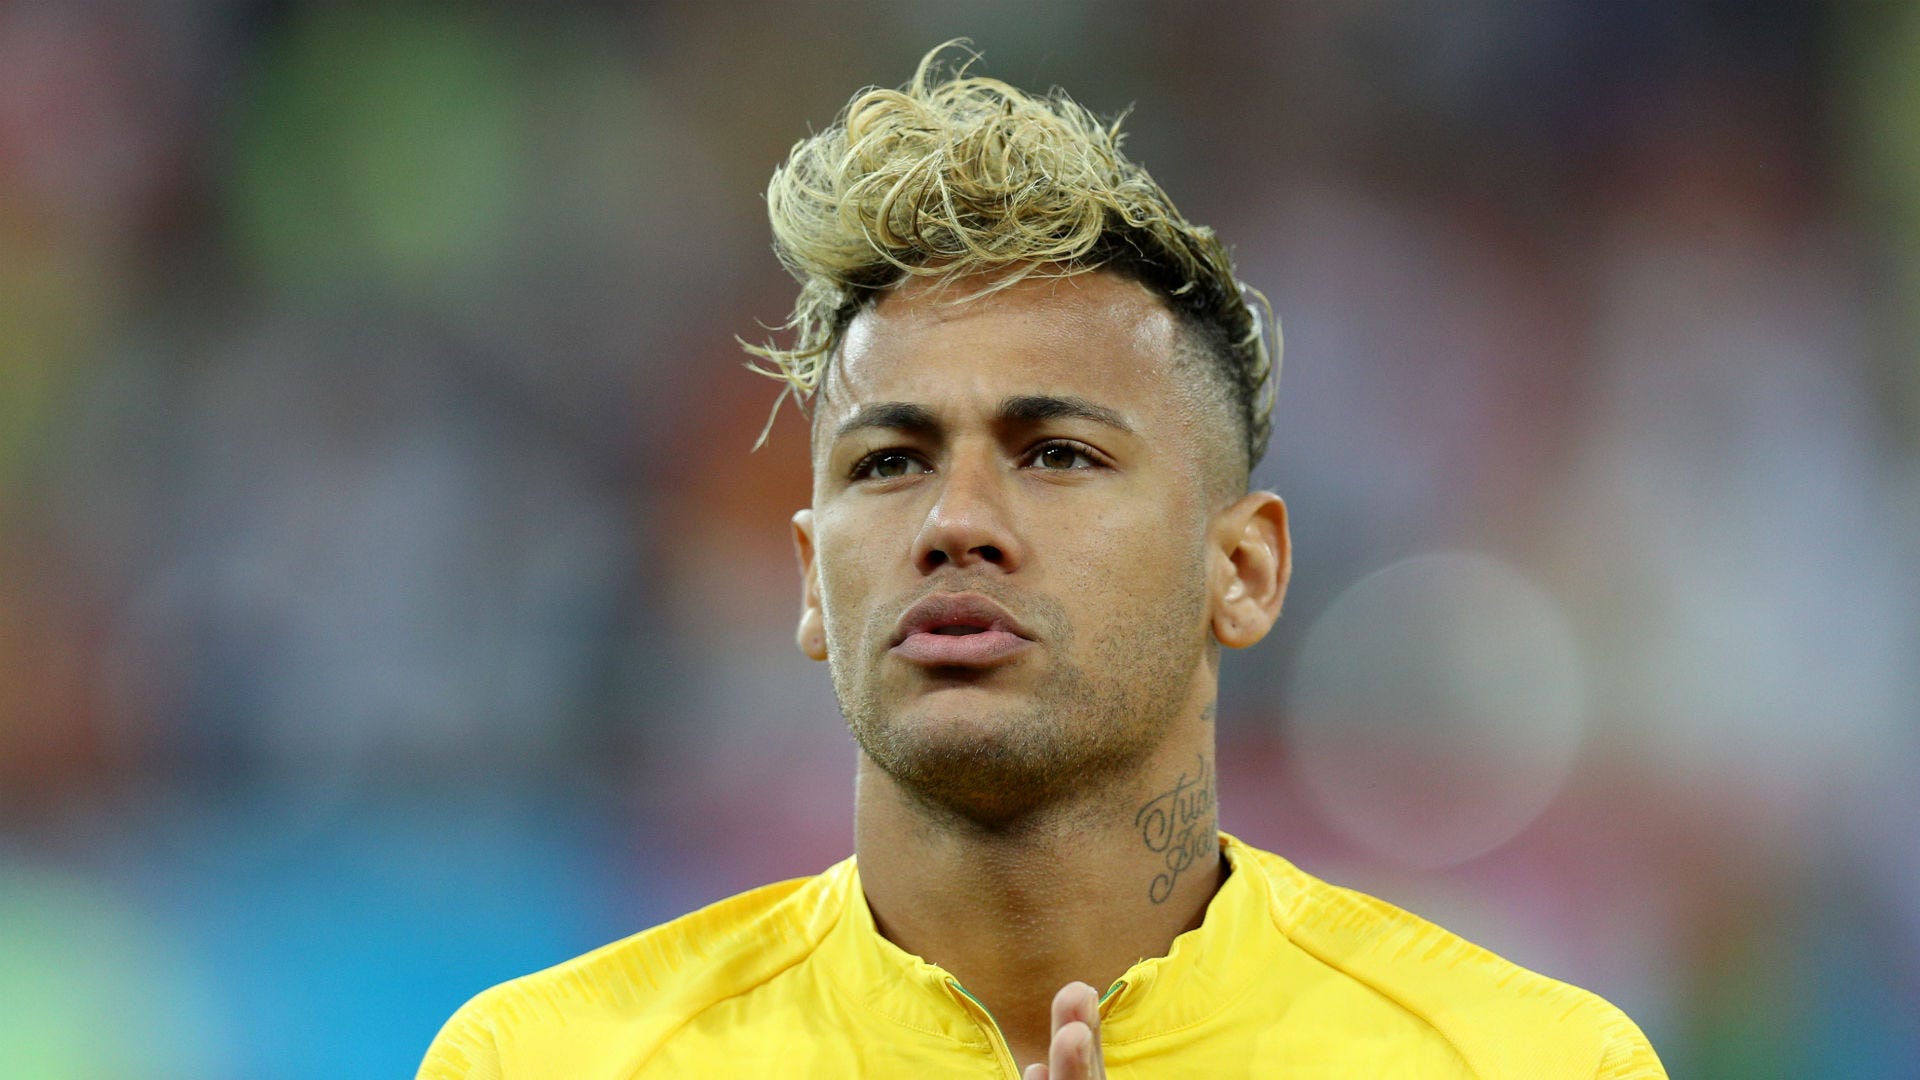 Neymar unveils dramatic new look after getting blond dreadlockstyle plaits  in fourhour procedure  The Sun